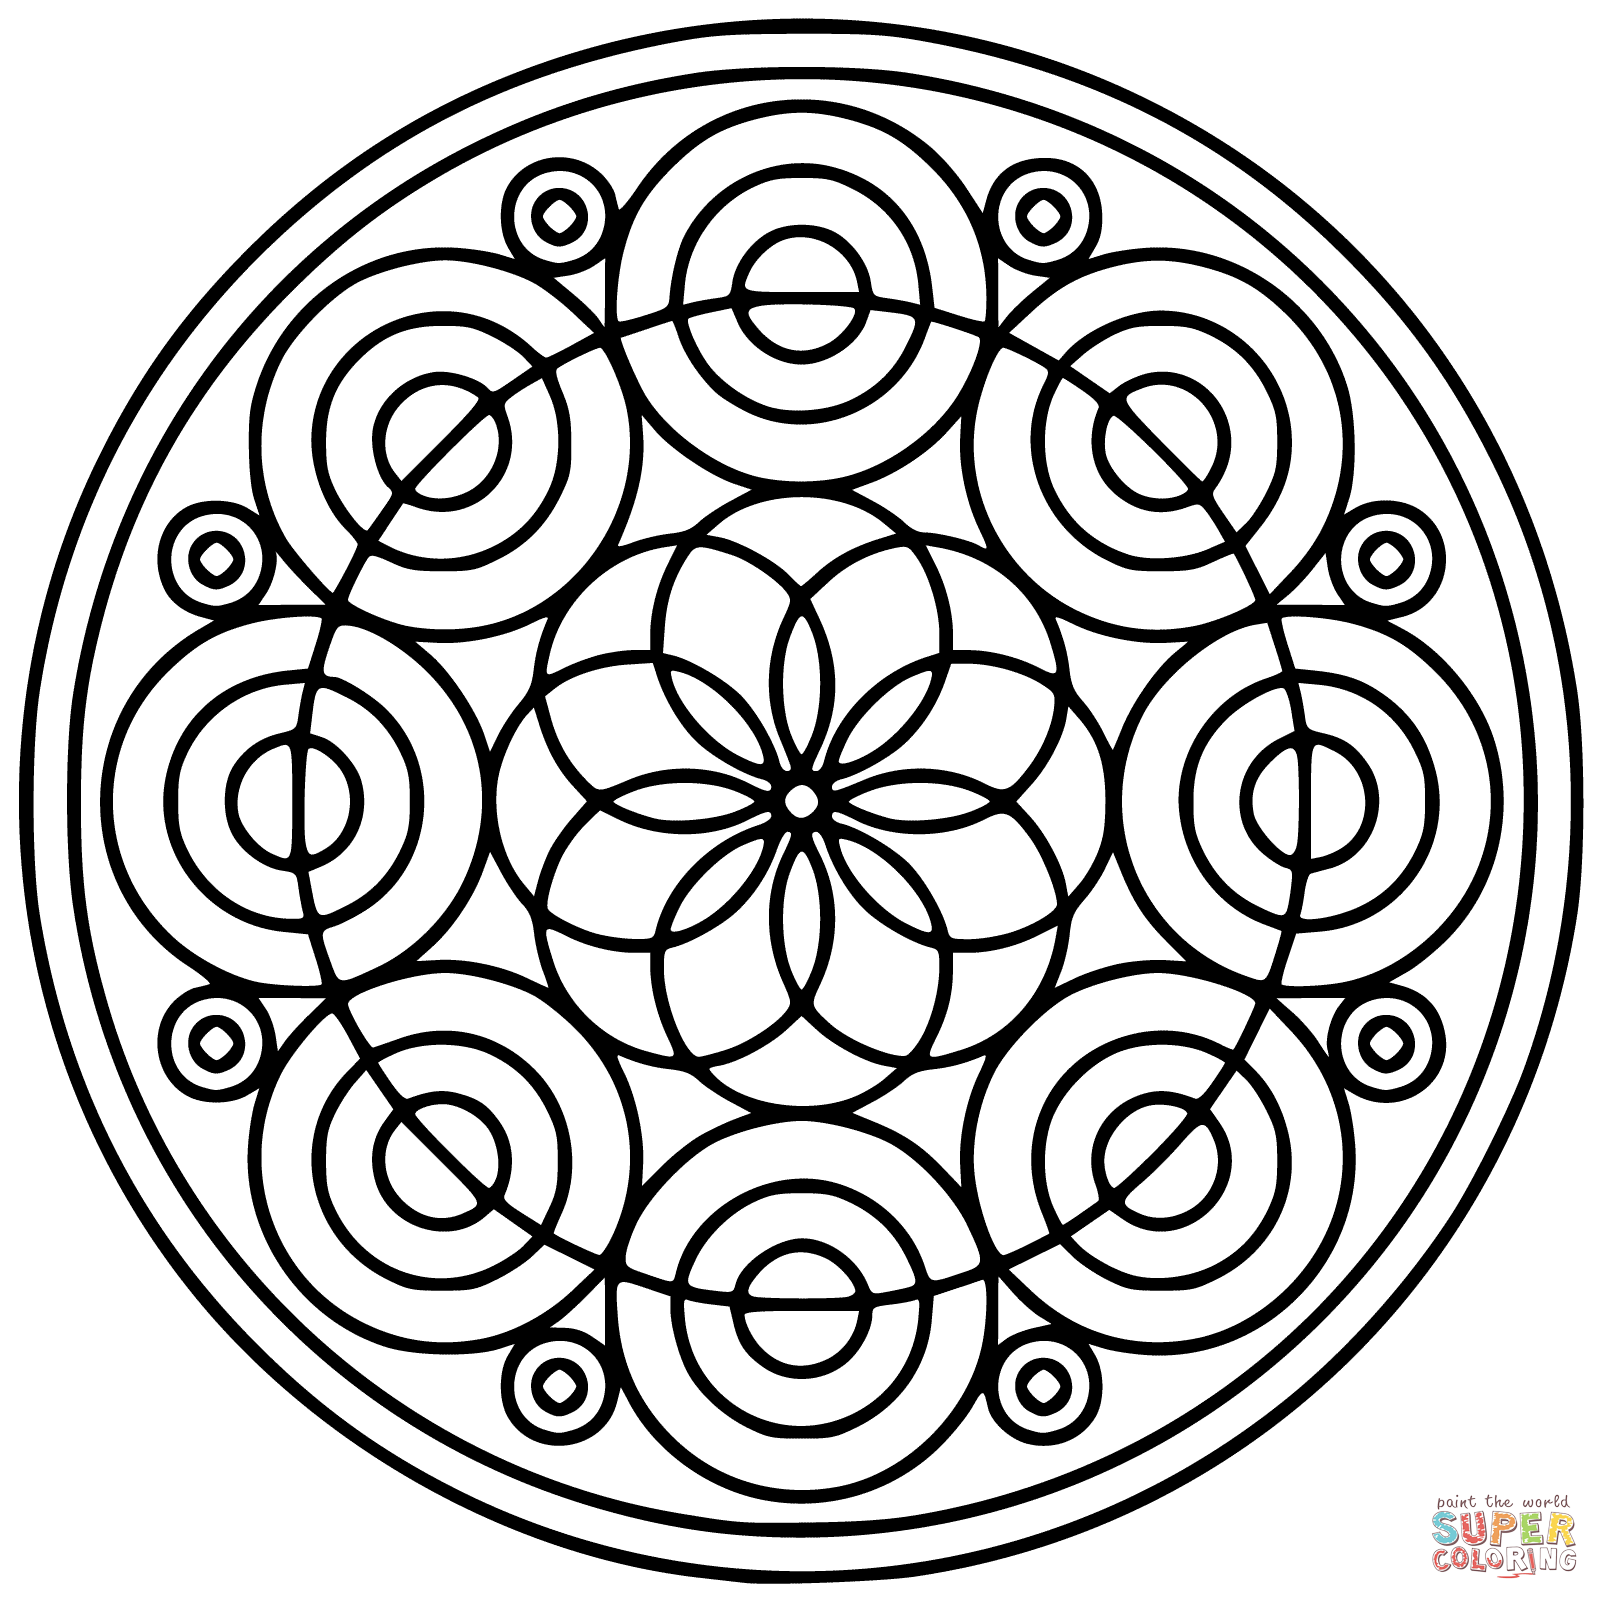 Spiral coloring #7, Download drawings